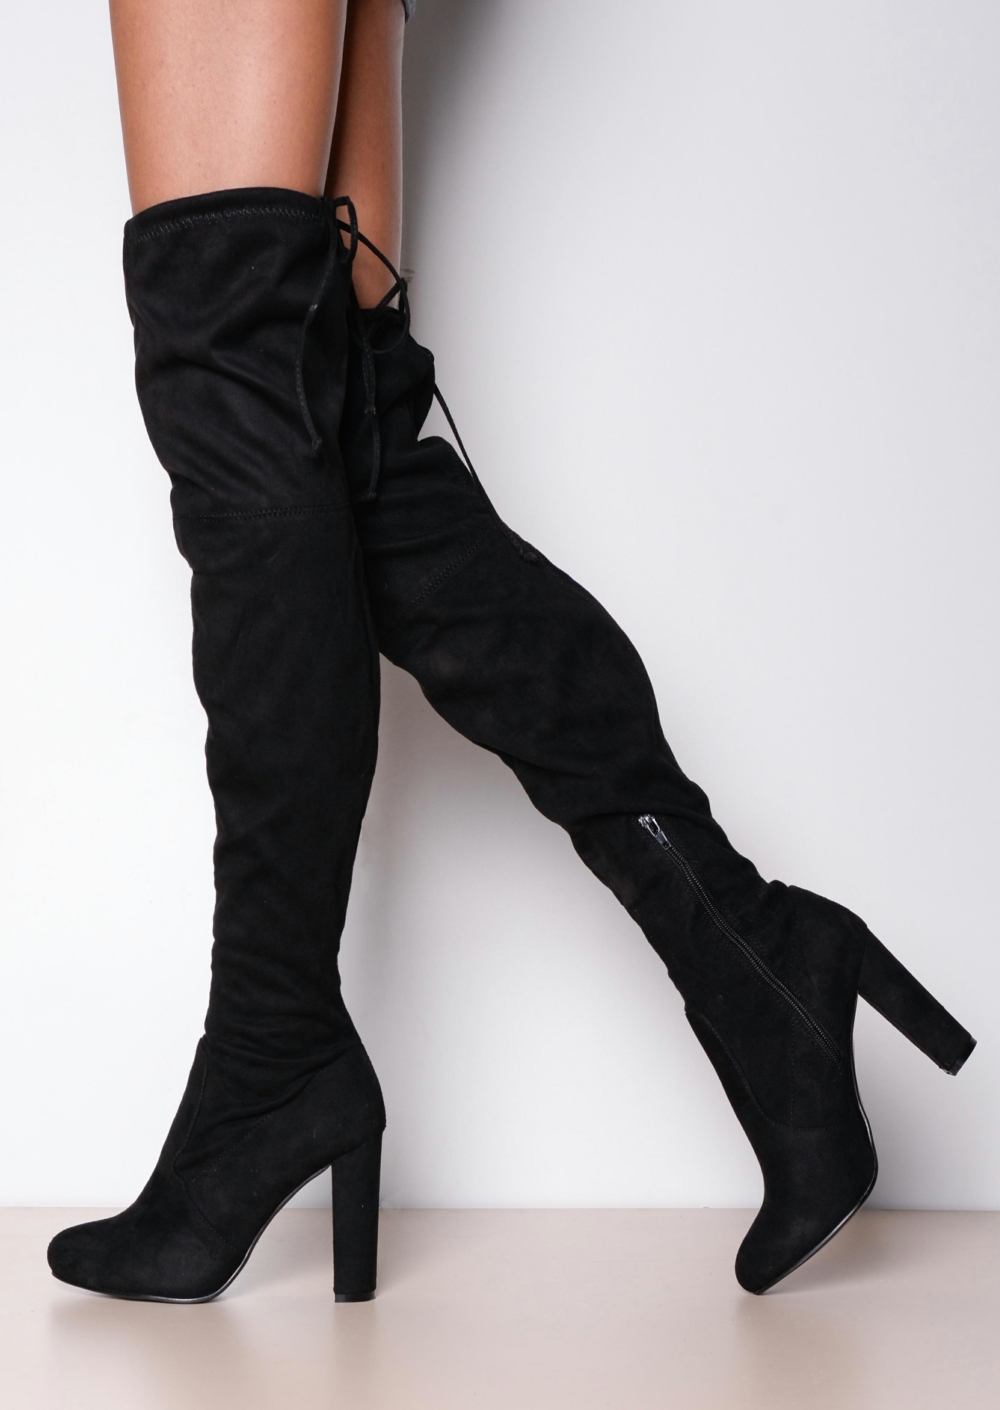  Thigh High Tie Back Faux Suede Knee High Heeled Boots